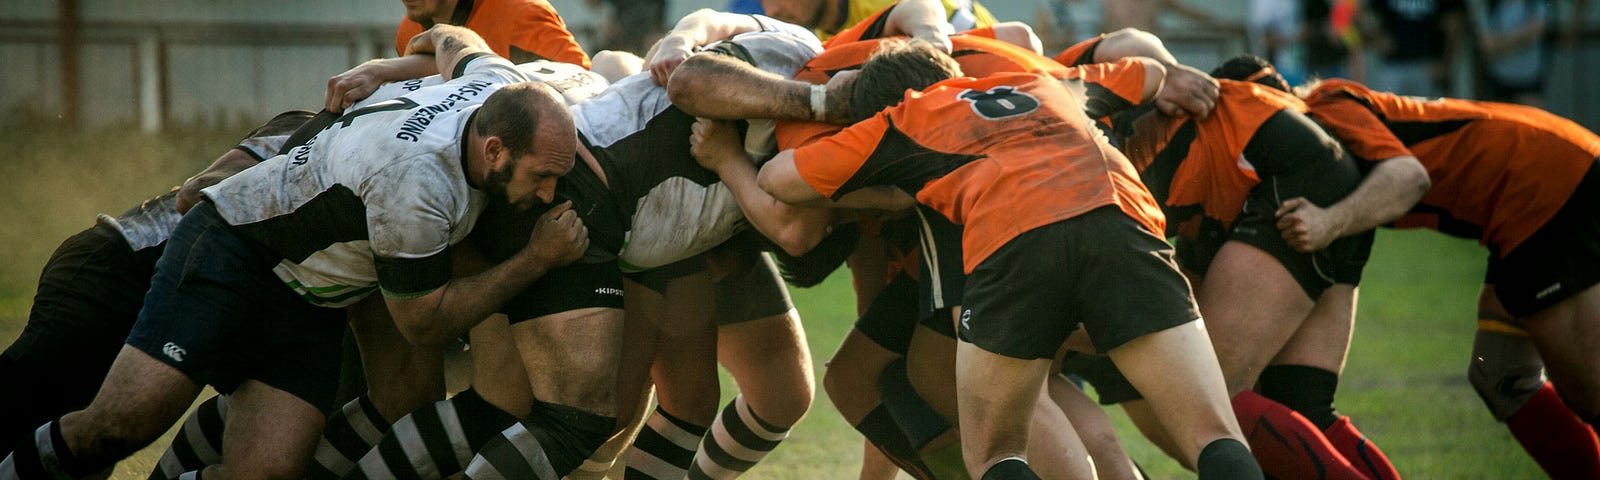 rugby players grappling together for the ball